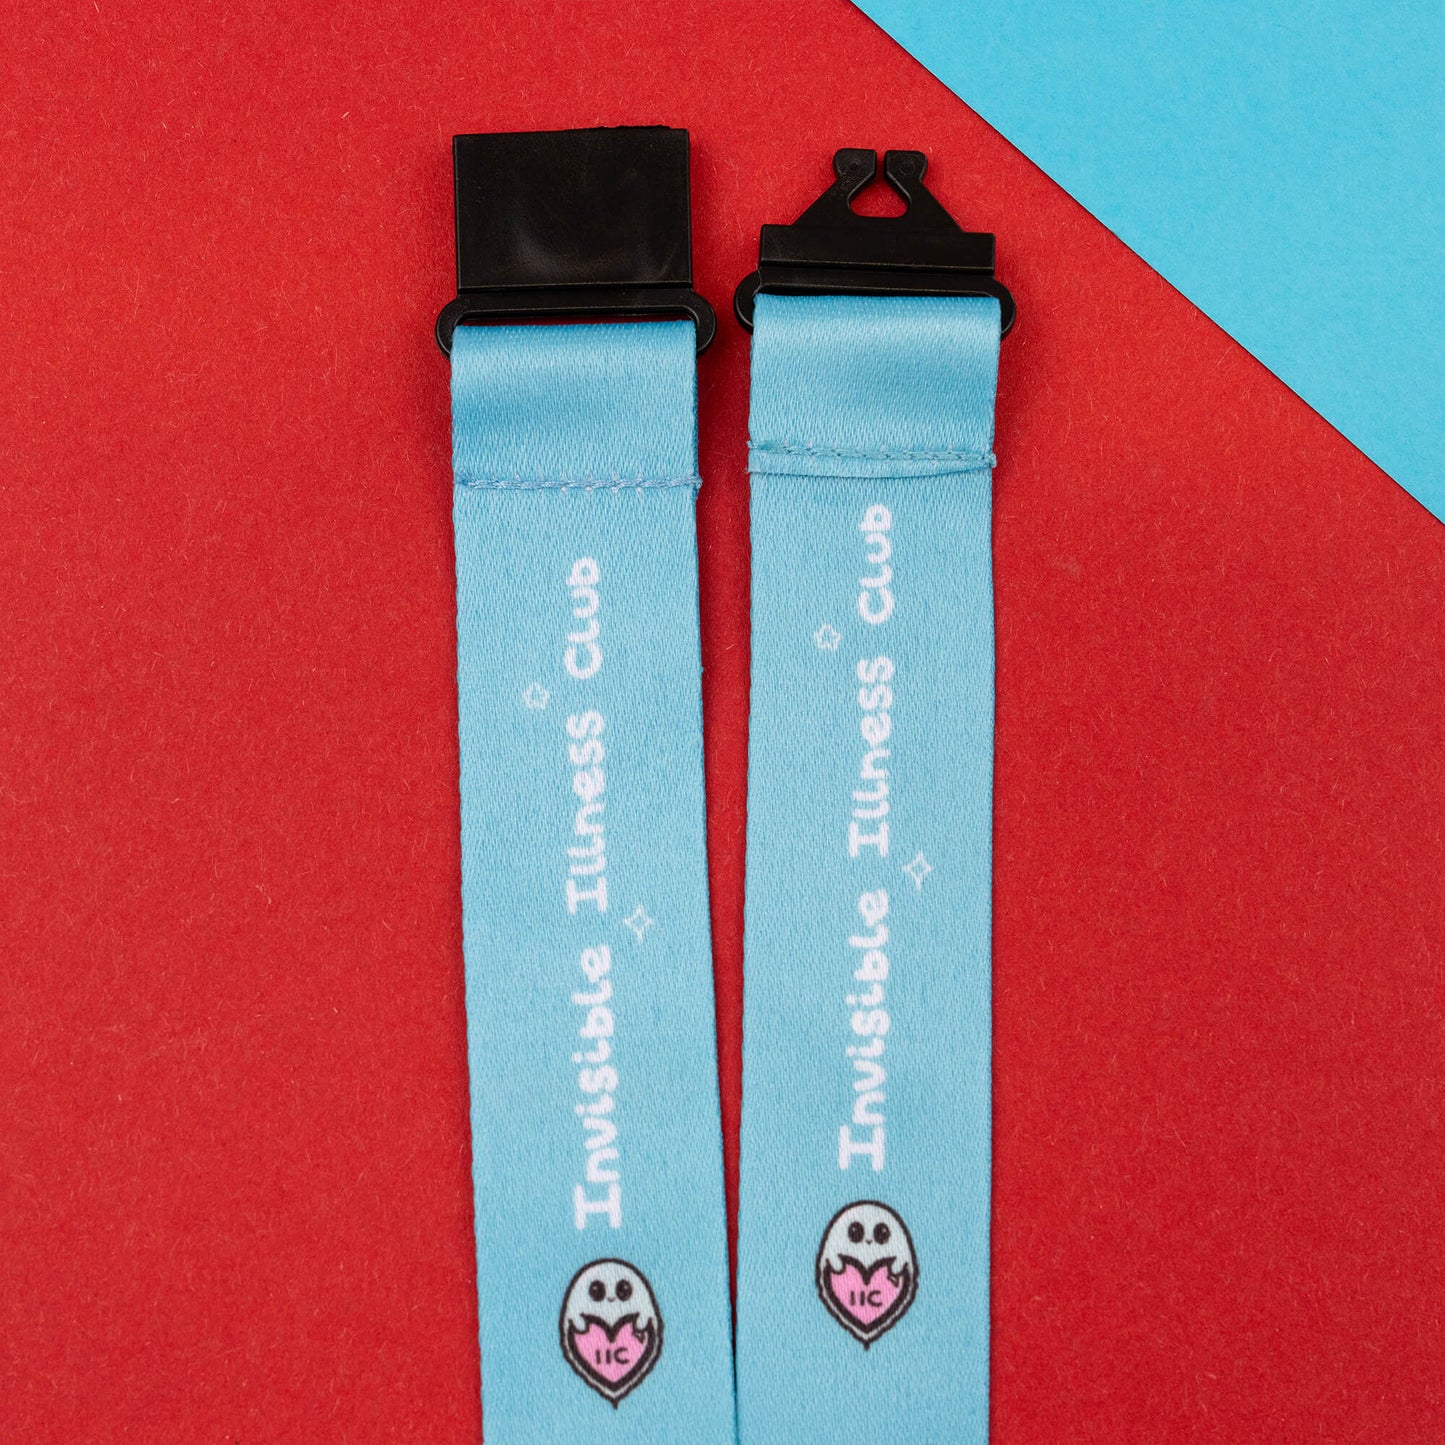 Close-up of a light blue lanyard with the 'Invisible Illness Club' text and a charming ghost logo. Equipped with black safety catches, this lanyard is designed to raise awareness for invisible illnesses and is shown on a red and blue geometric background.